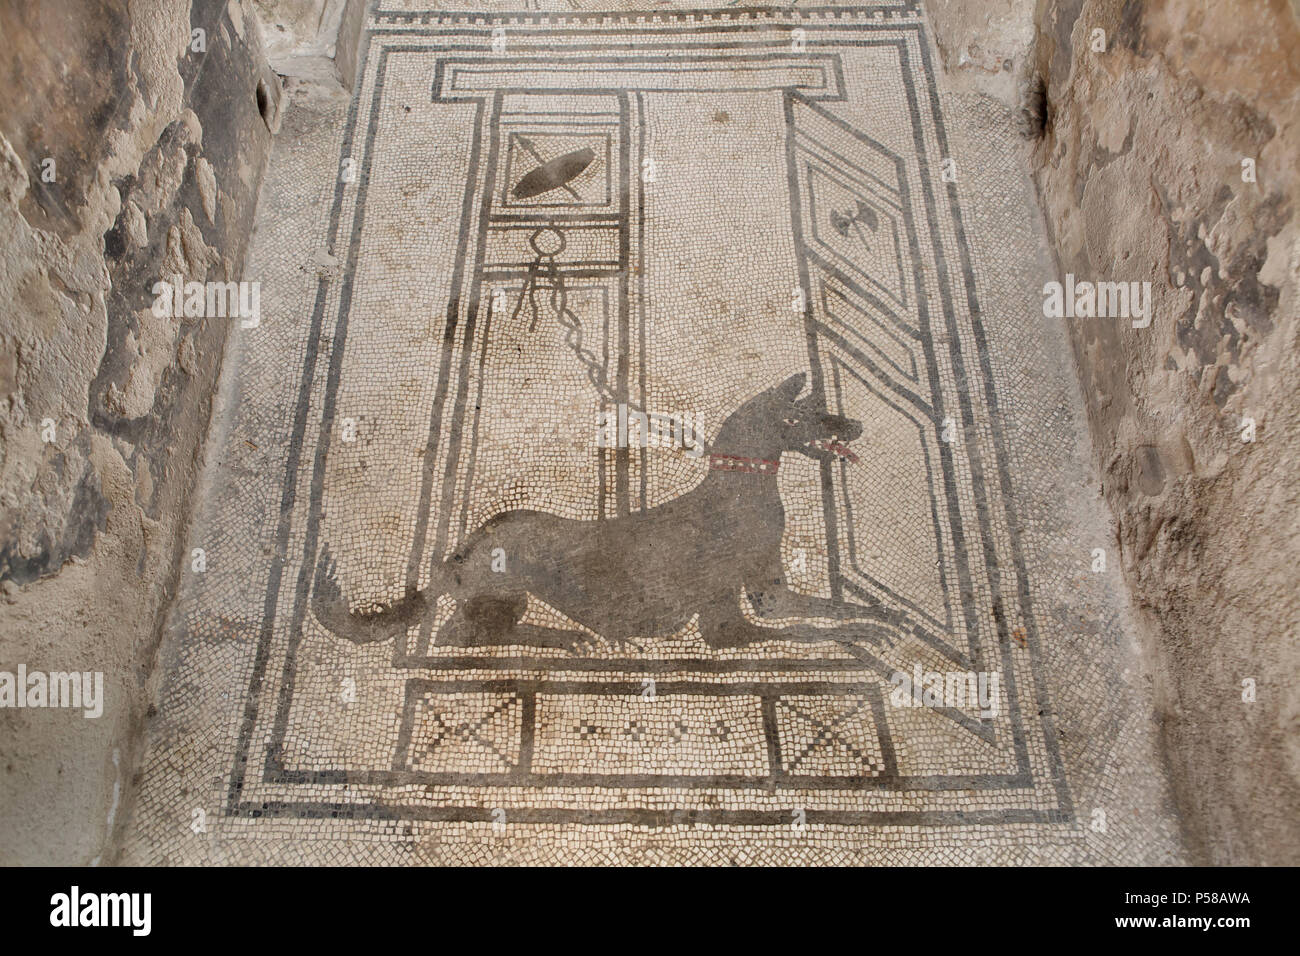 Dog depicted in the Roman mosaic Cave canem (Beware of the Dog) in the House of Paquius Proculus (Casa di Paquius Proculus) in the archaeological site of Pompeii (Pompei) near Naples, Campania, Italy. Stock Photo